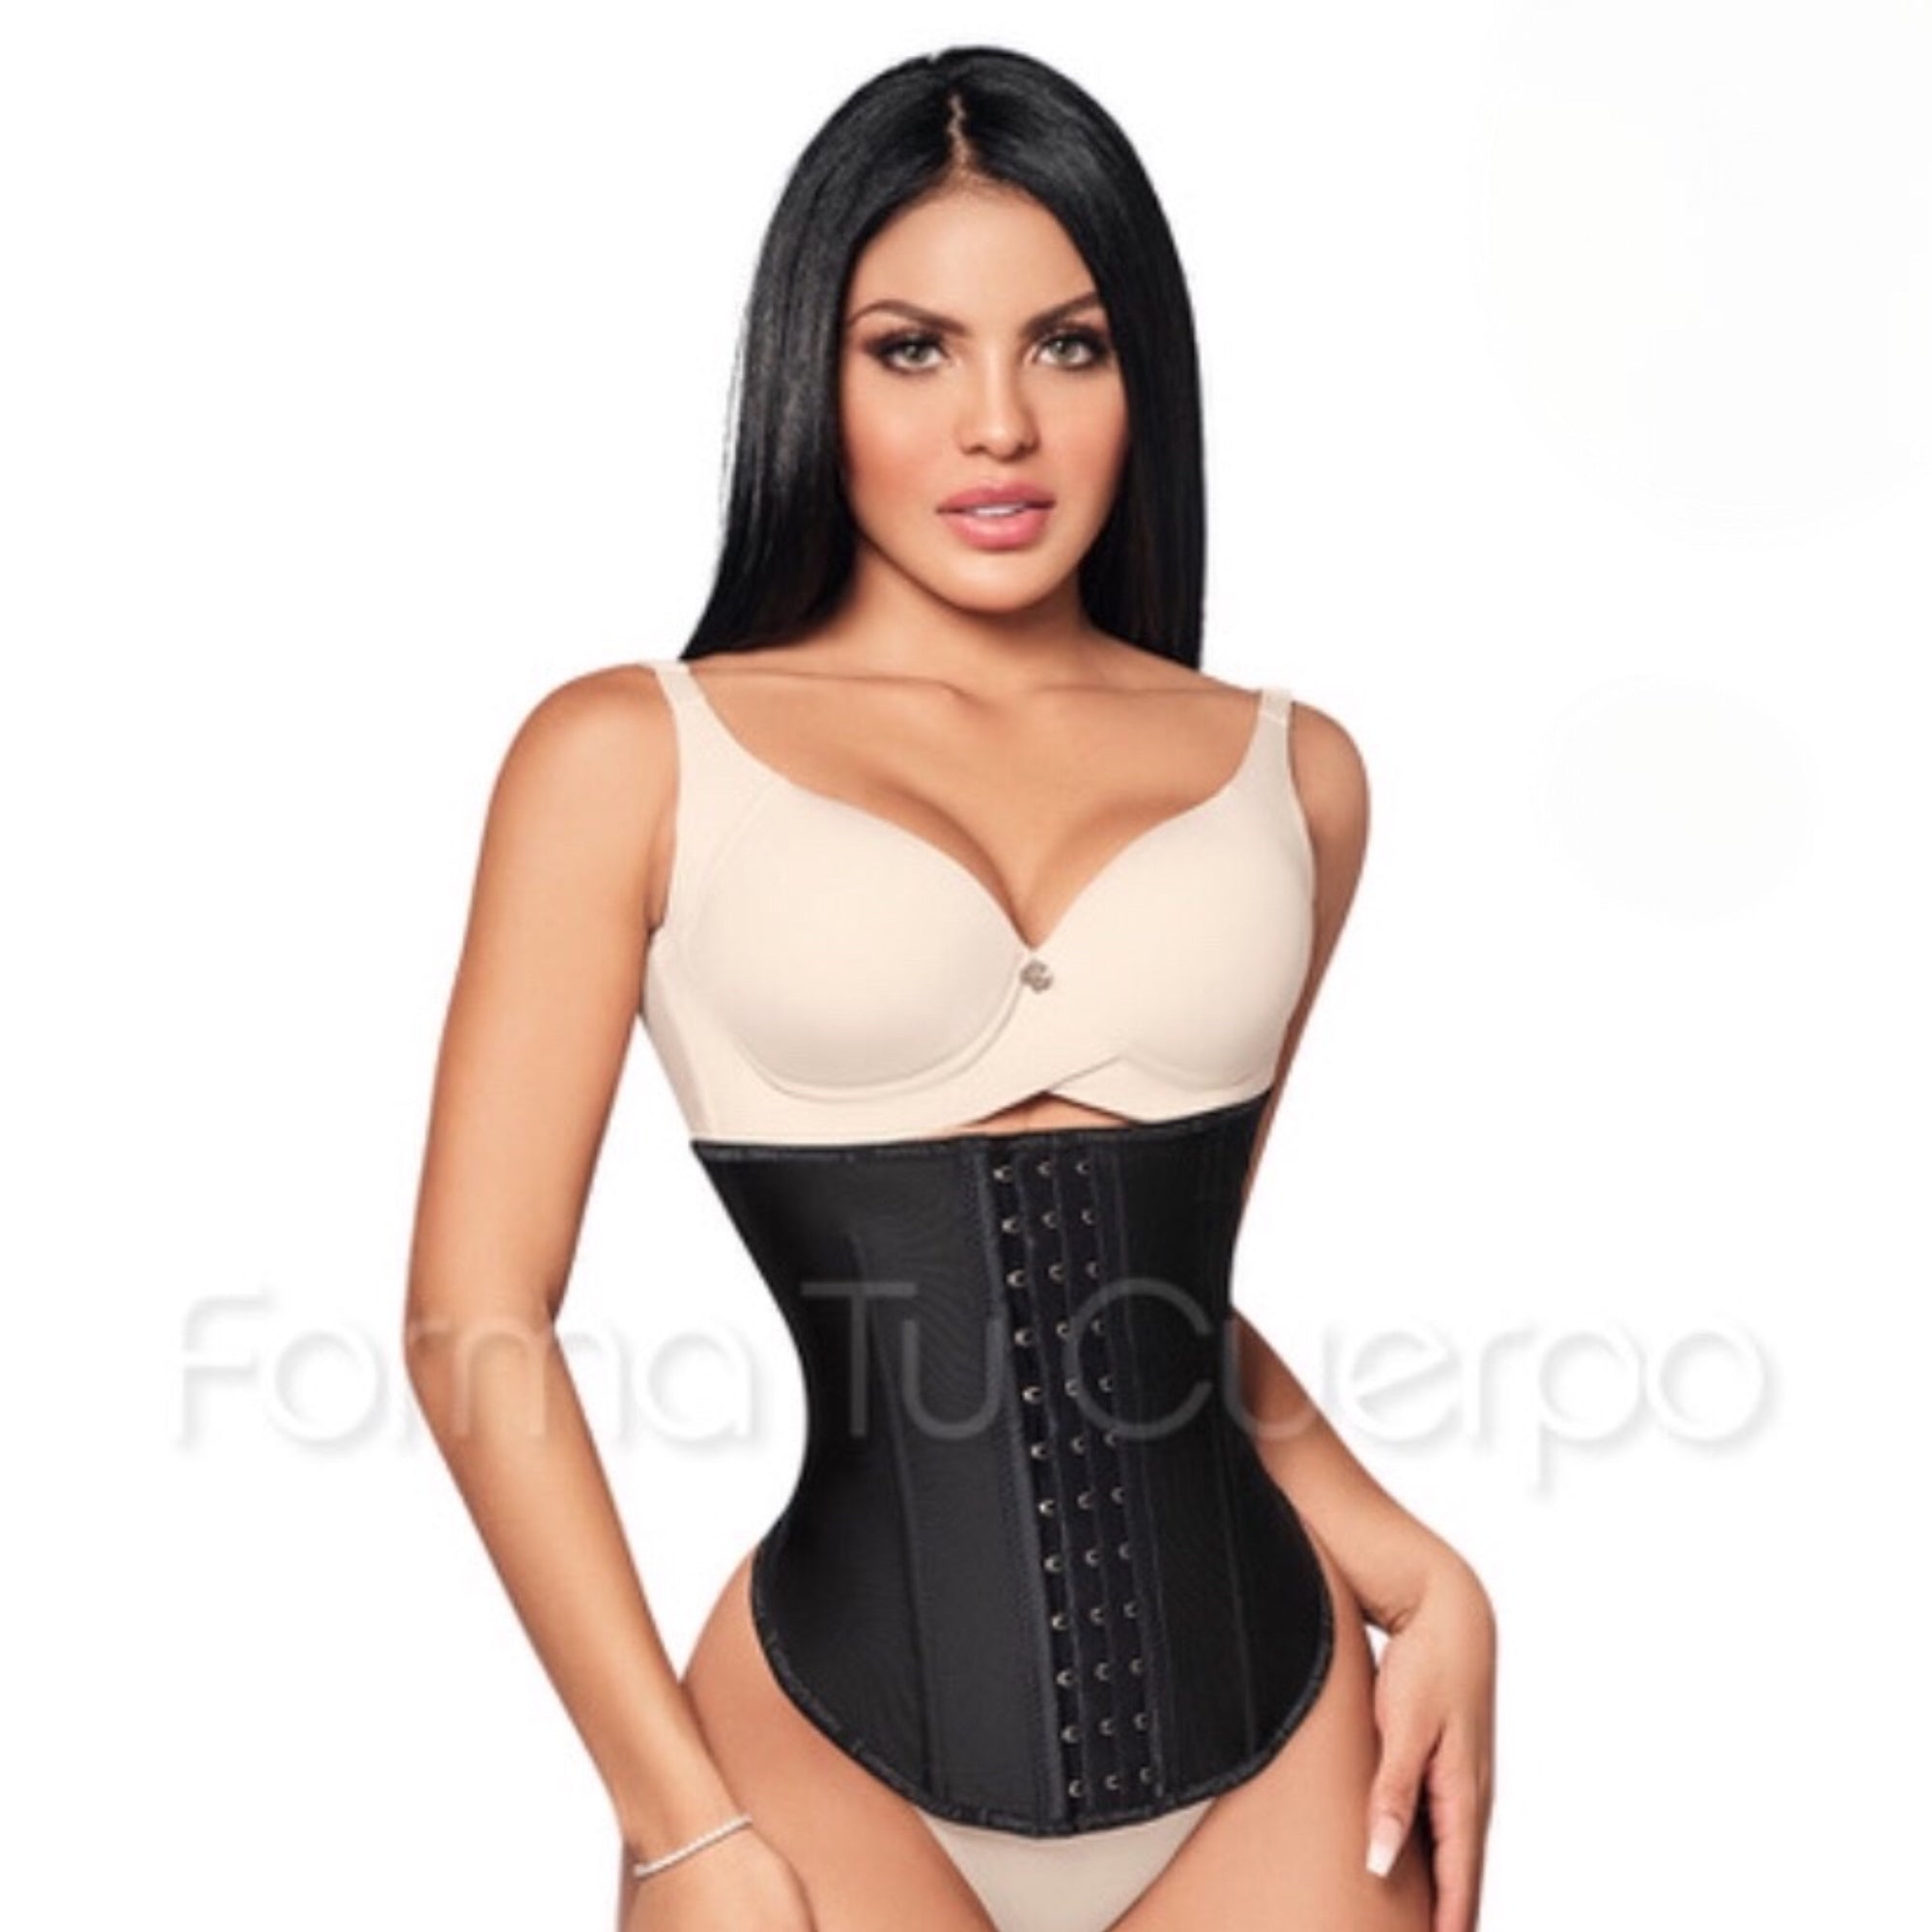 Waist Trainer – Women's Shapewear – Instantly Reduces Your Waist Size  Giving You an Hourglass Figure 